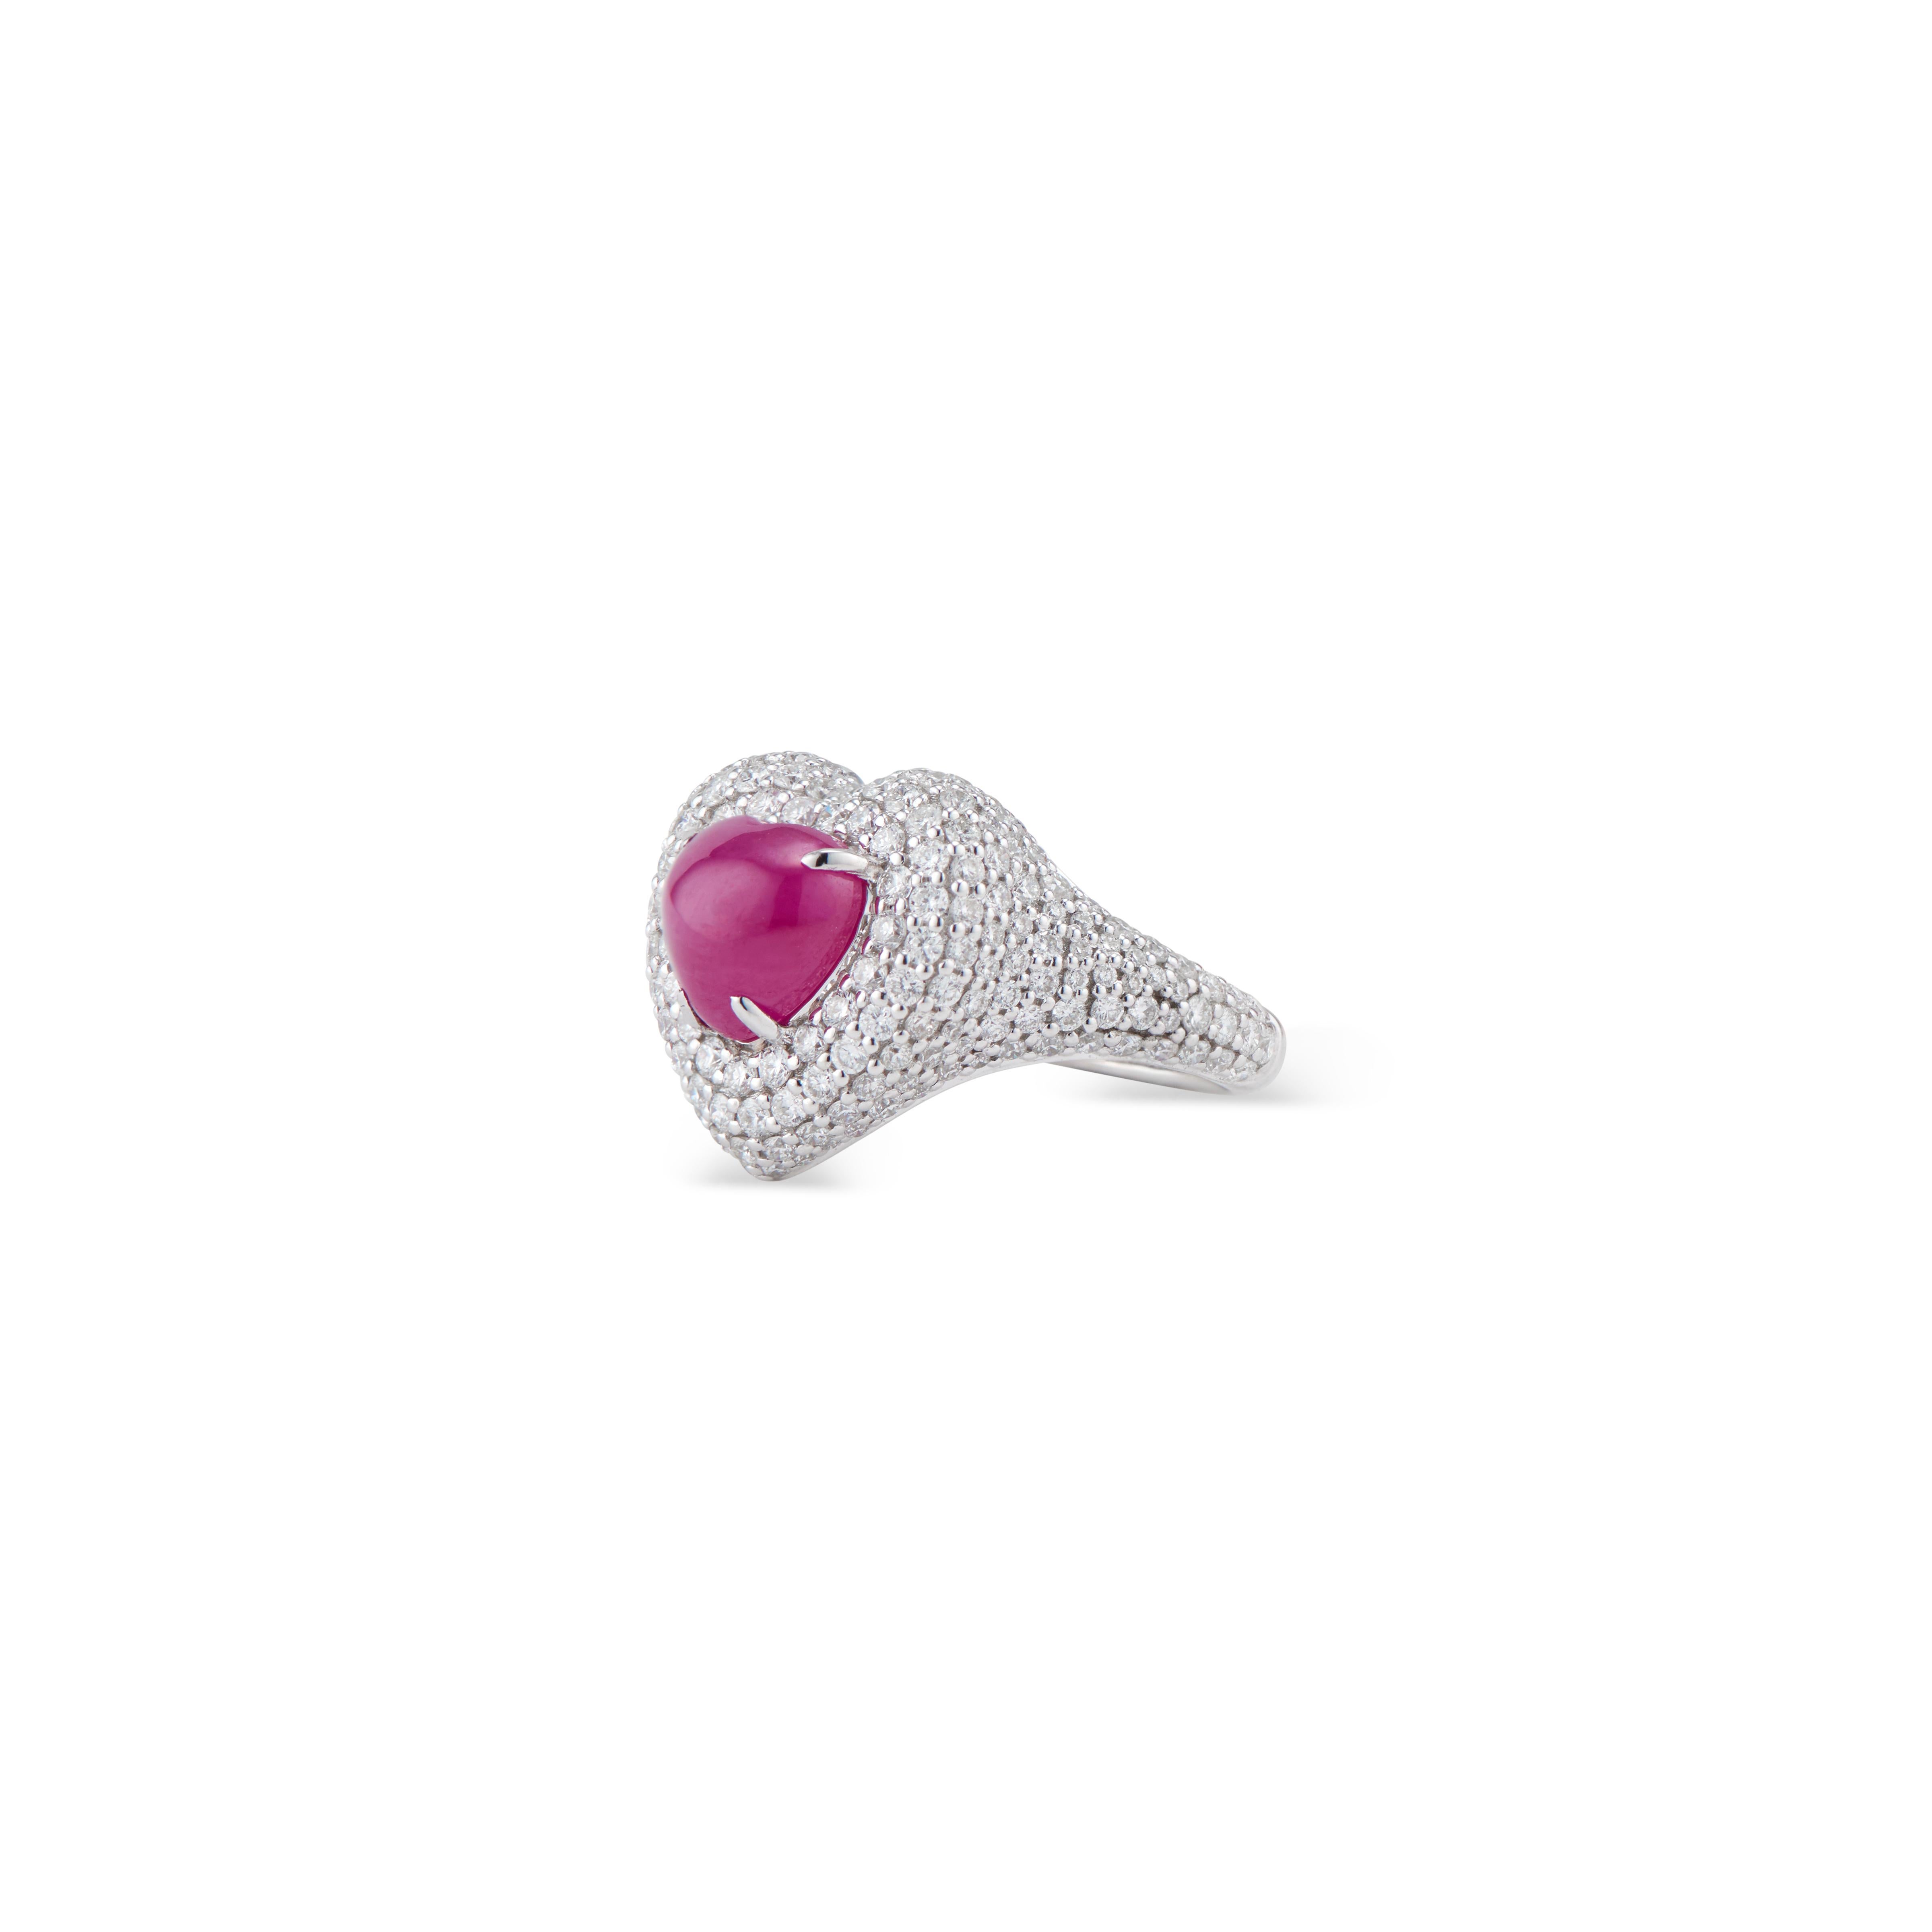 Big Heart Ruby Cabochon and diamond pinky ring includes a Burma No Heat Ruby Cabochon of 1.58 ct and 0.92 ctw pave set diamonds, in 18k white gold